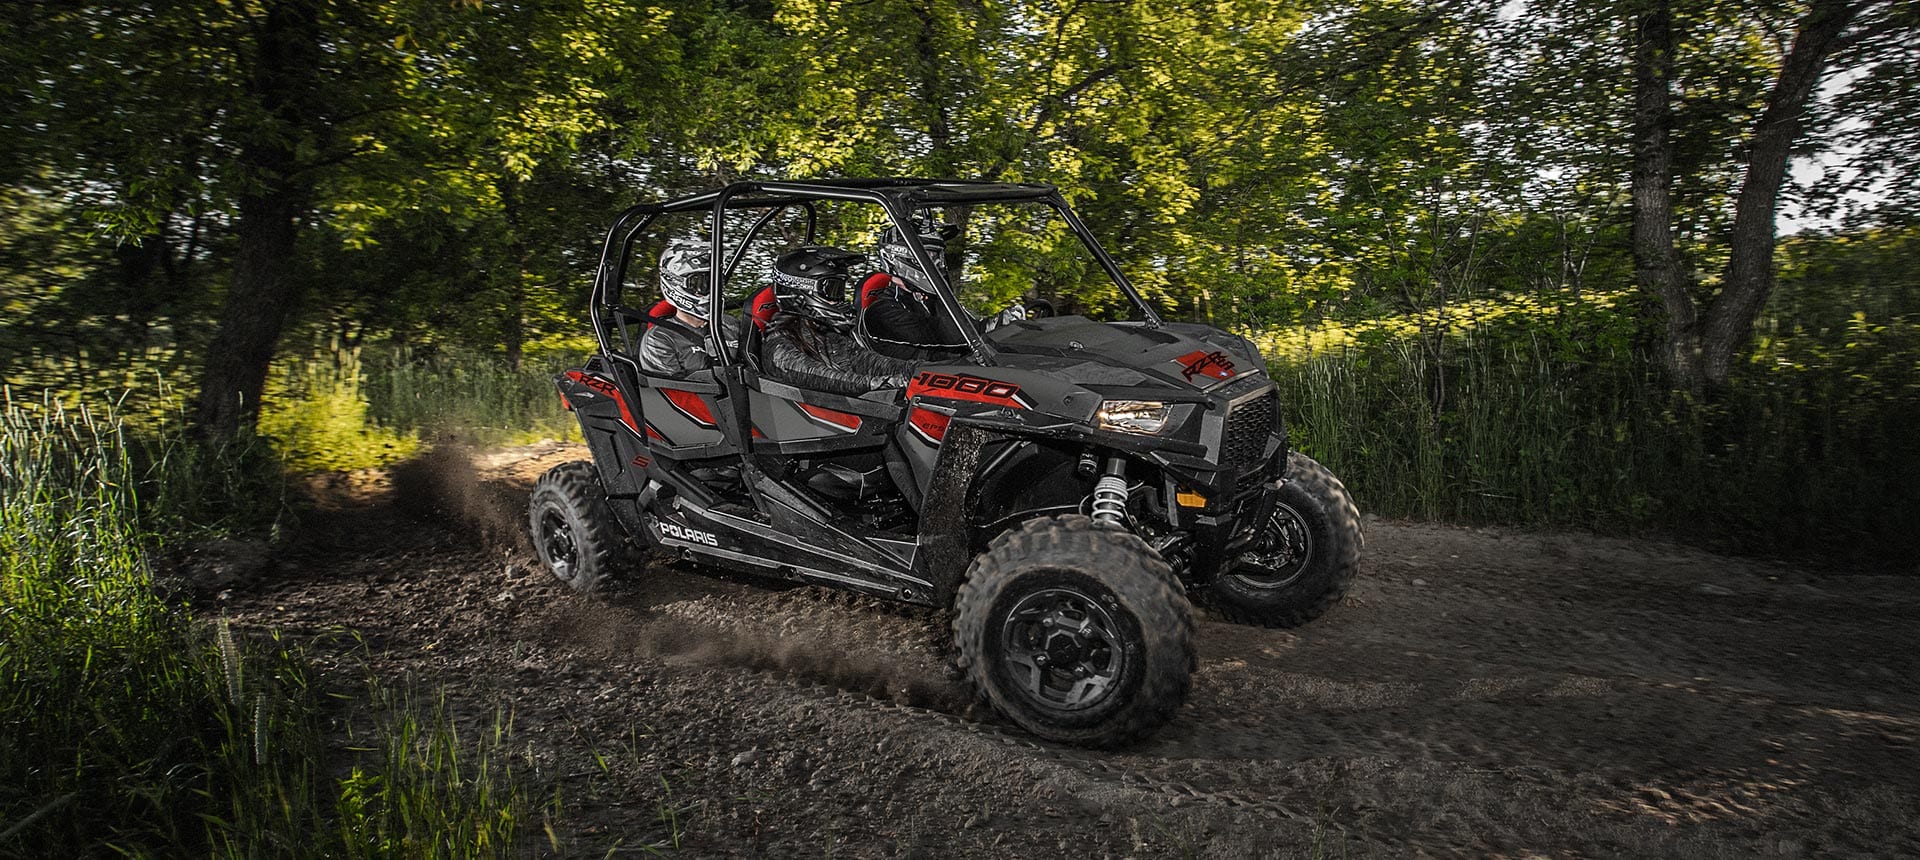 RZR S4 1000 4 SEATER OFFROAD VEHICLE